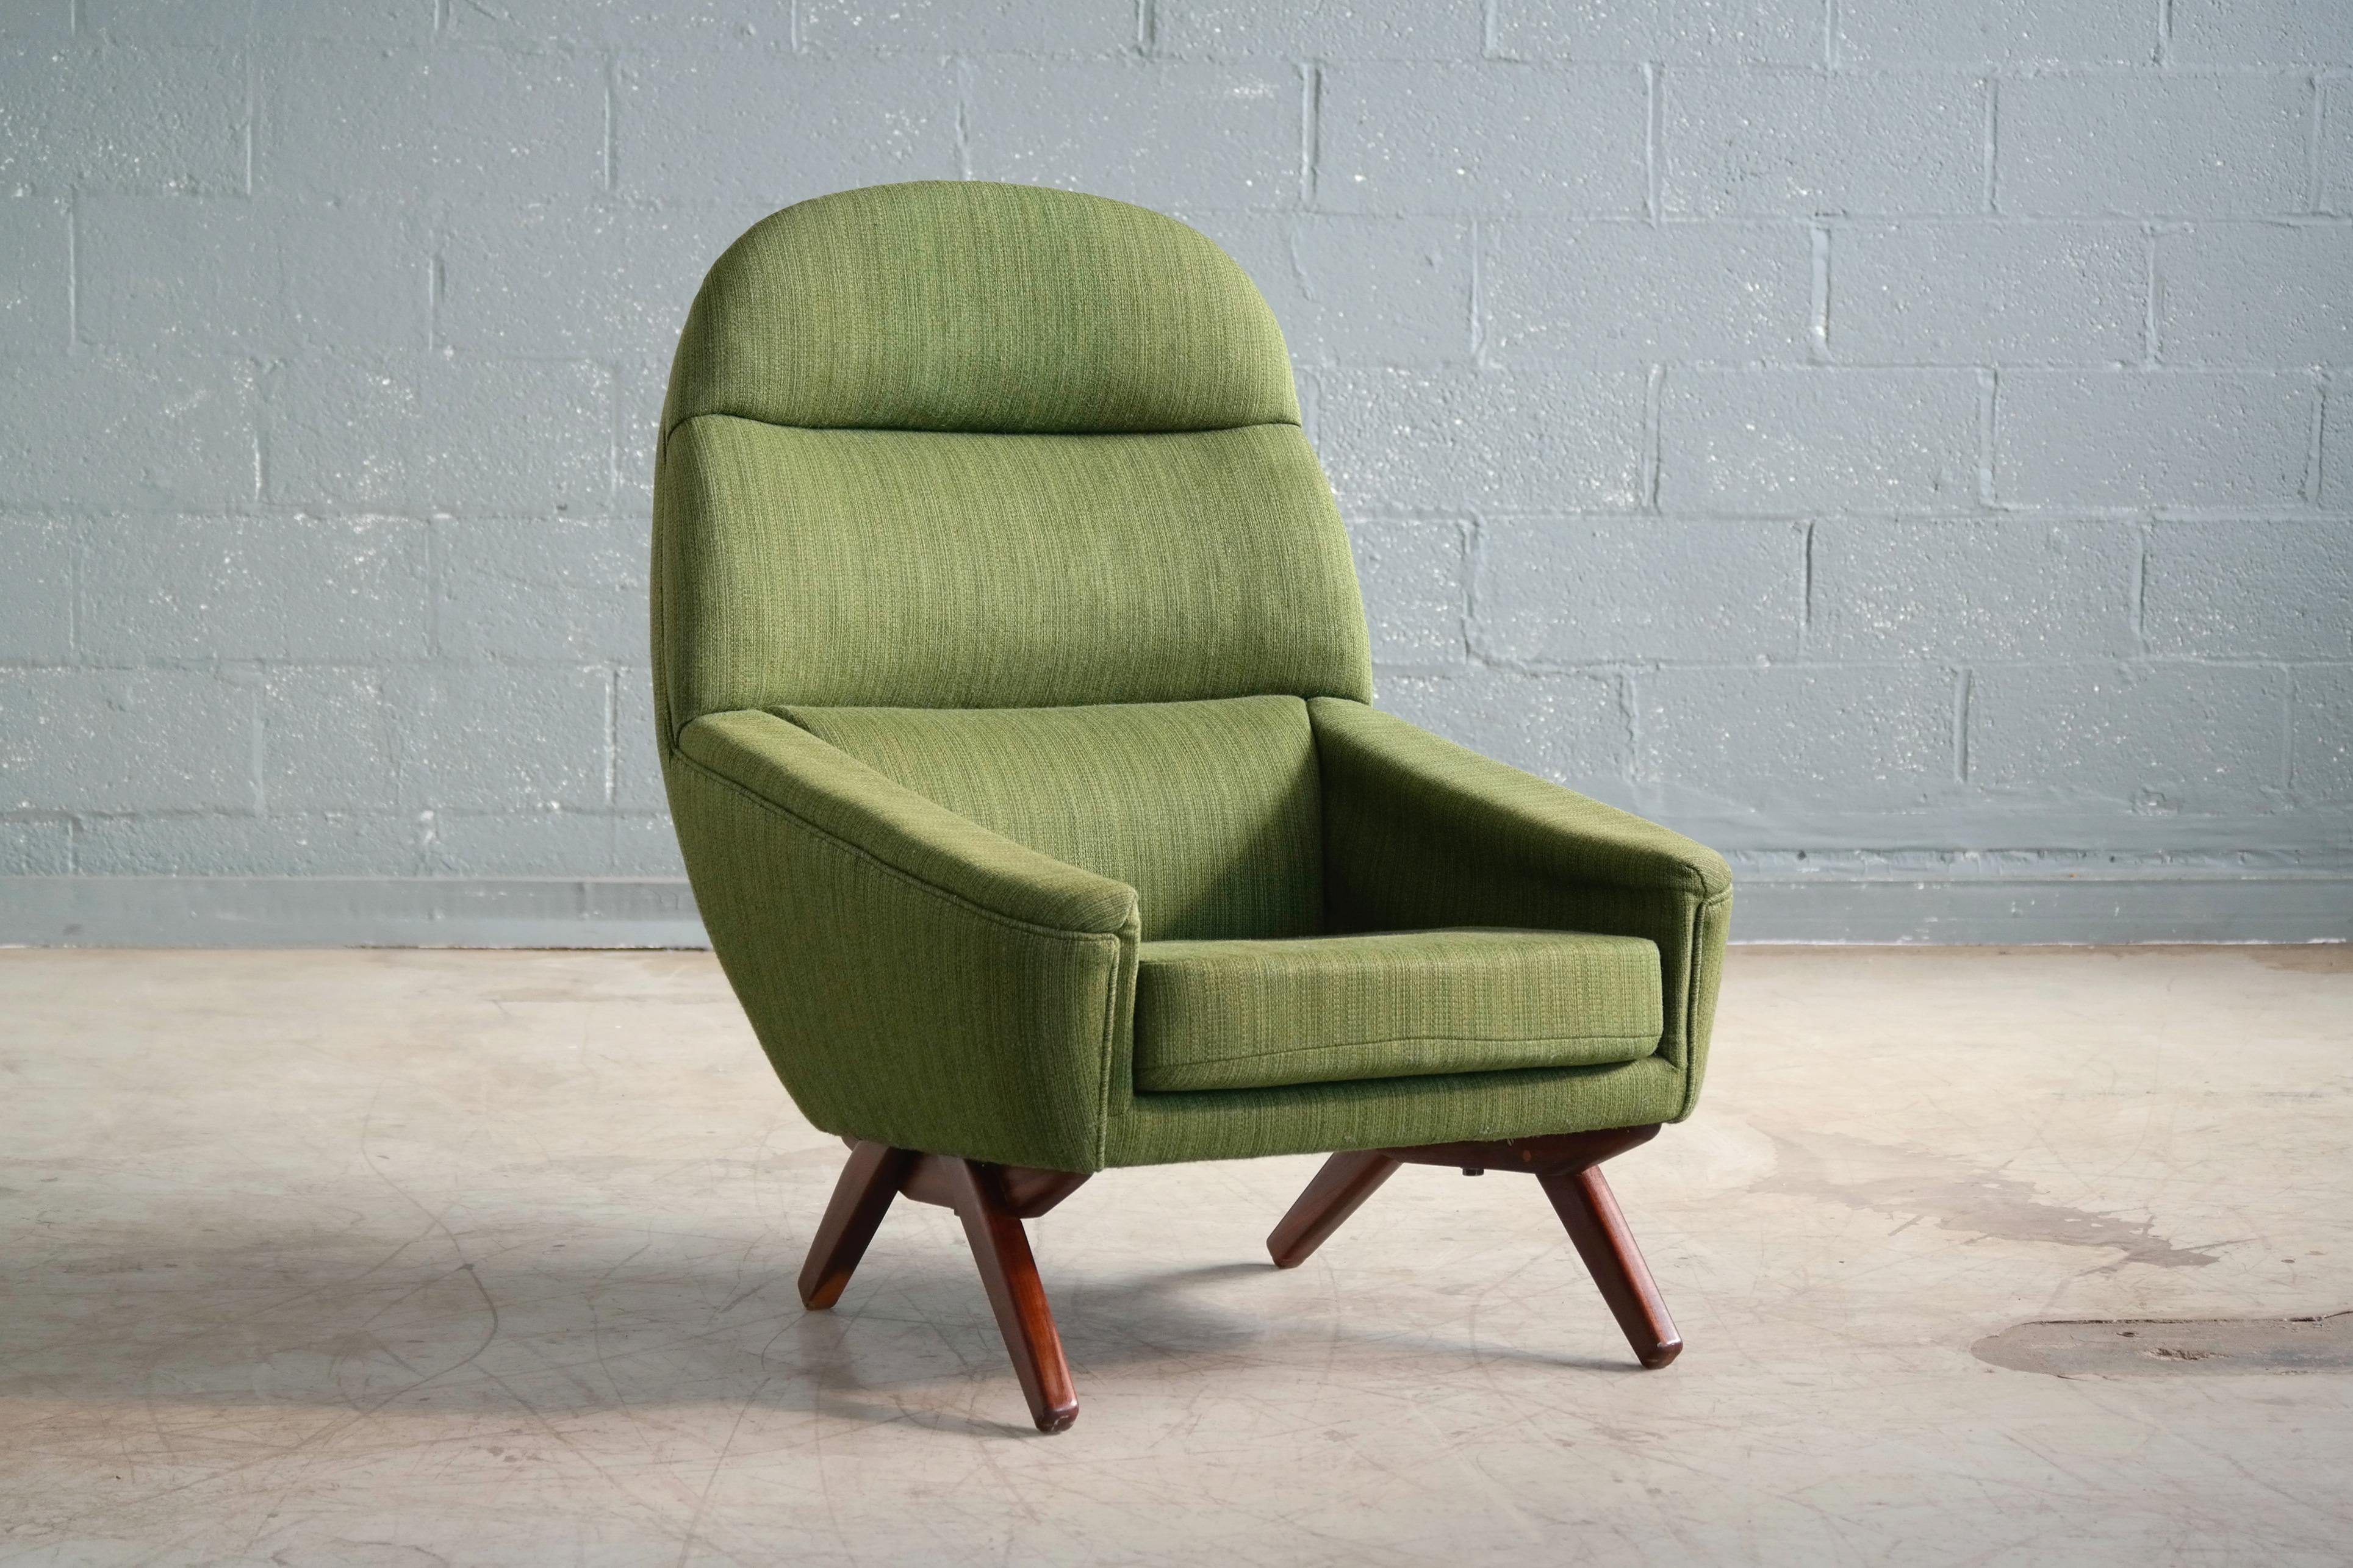 The ultimate 1960s cool lounge chair by Leif Hansen. Increasingly sought after Leif Hansen often overlooked as one of the great Danish designers as his works were not made in great numbers are scarce in today's market. Hansen's designs bear some